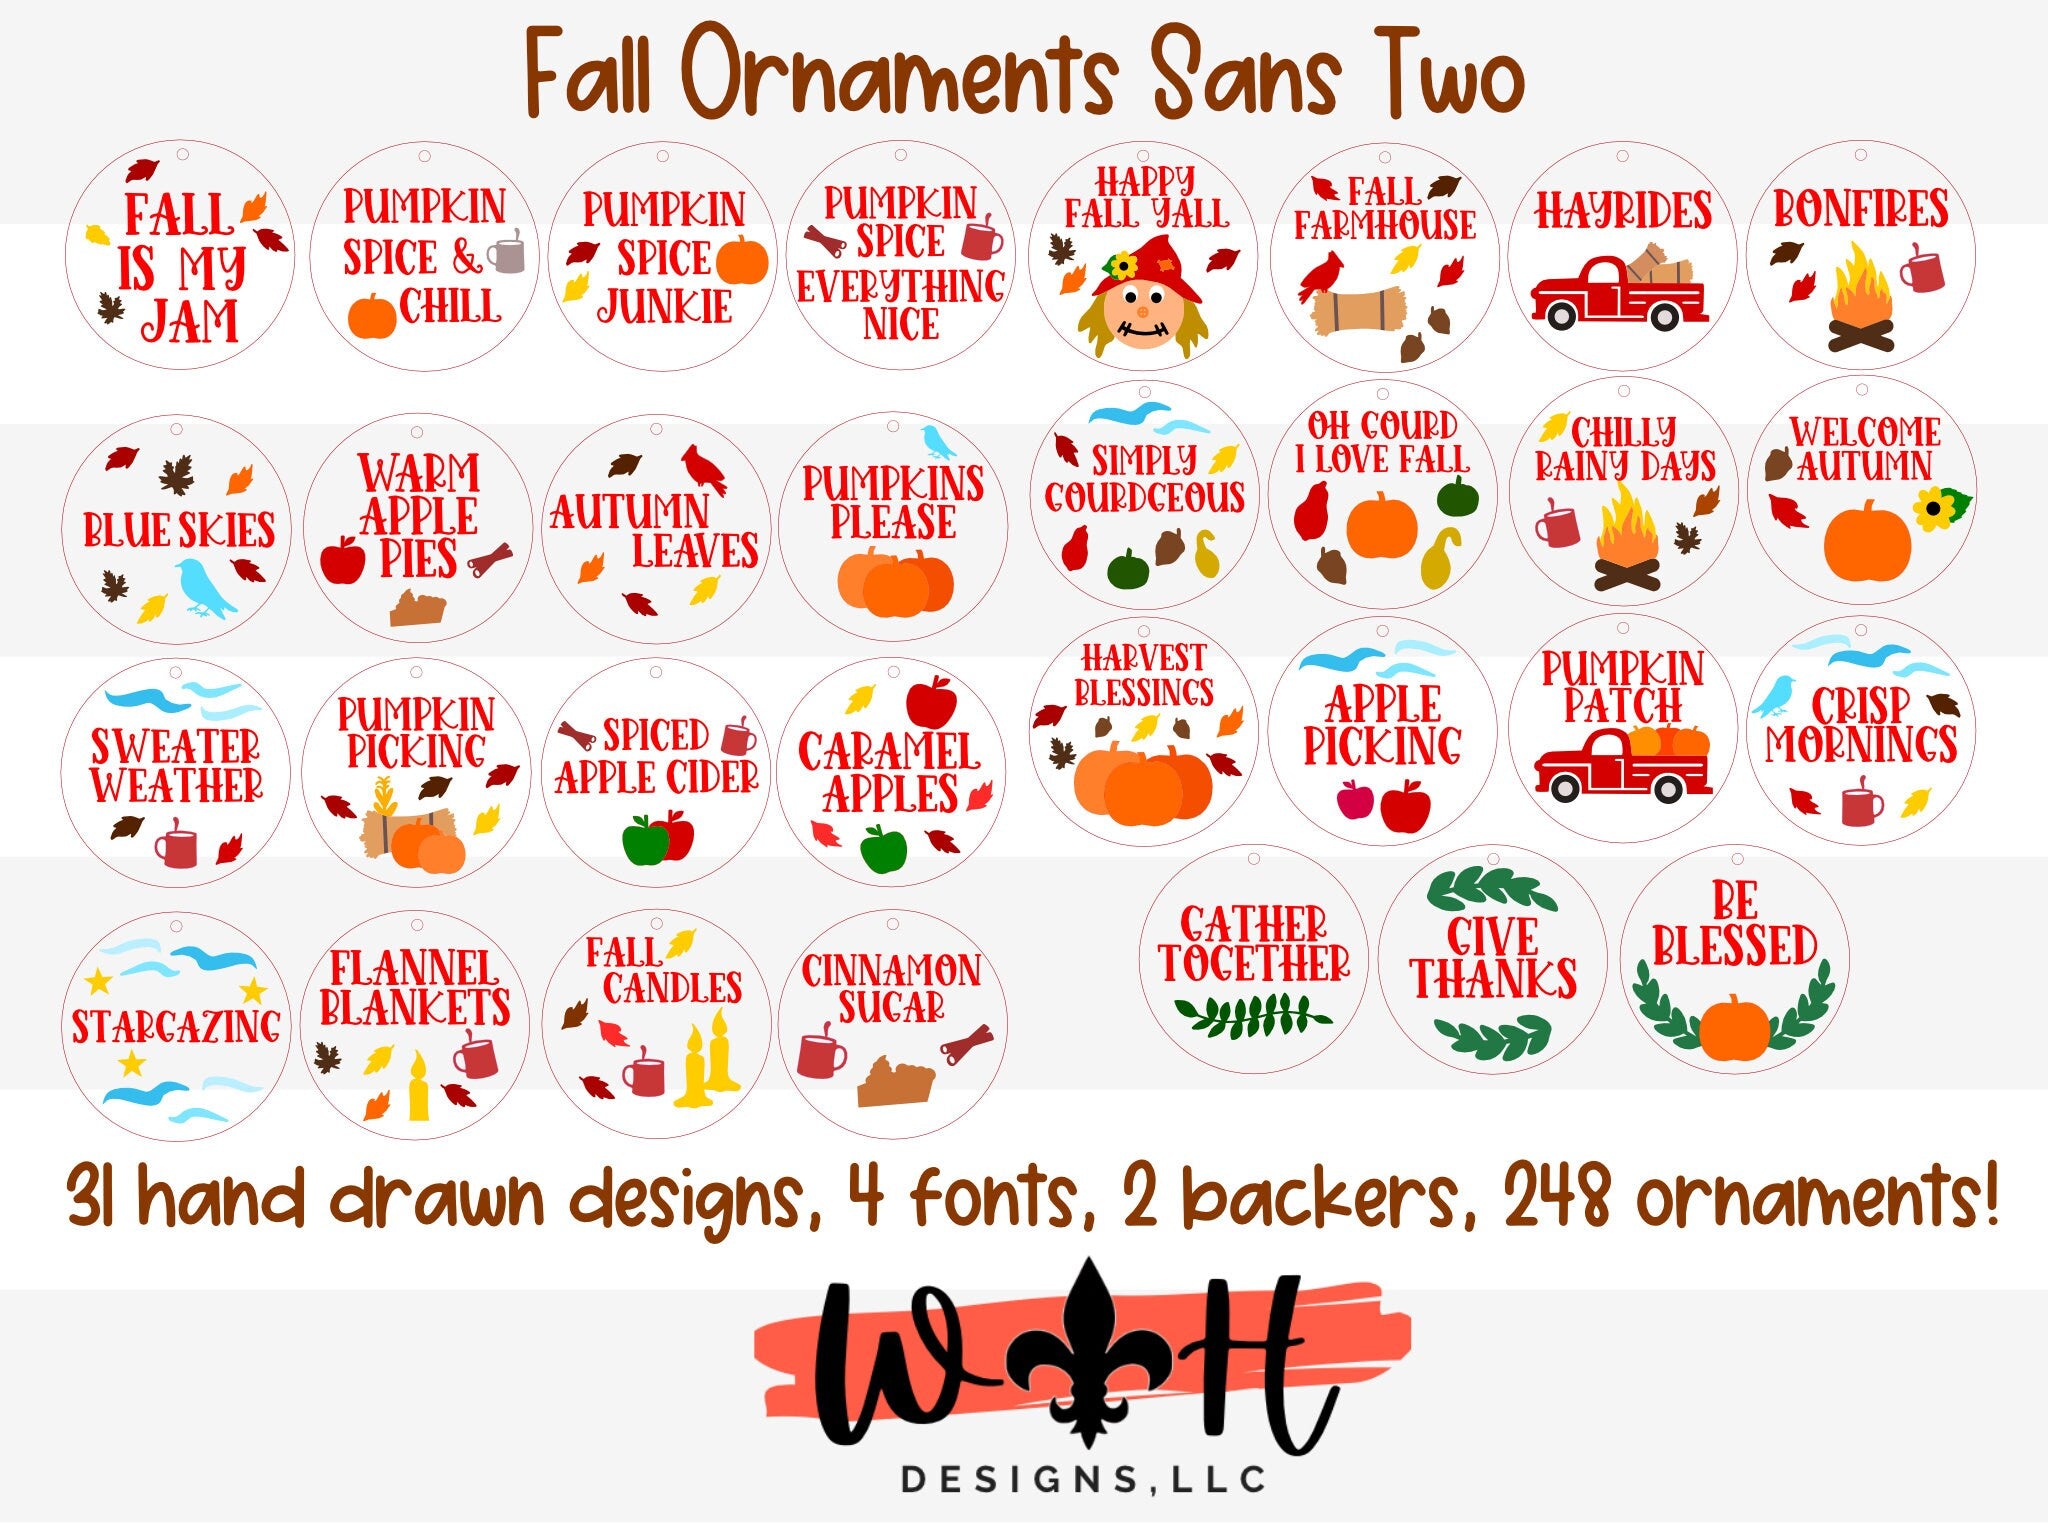 DIGITAL FILE - Autumn Icons - Shiplap Rustic Farmhouse - Fall Traditions Ornaments - SVG Cut File For Glowforge - Cut Files For Lasers